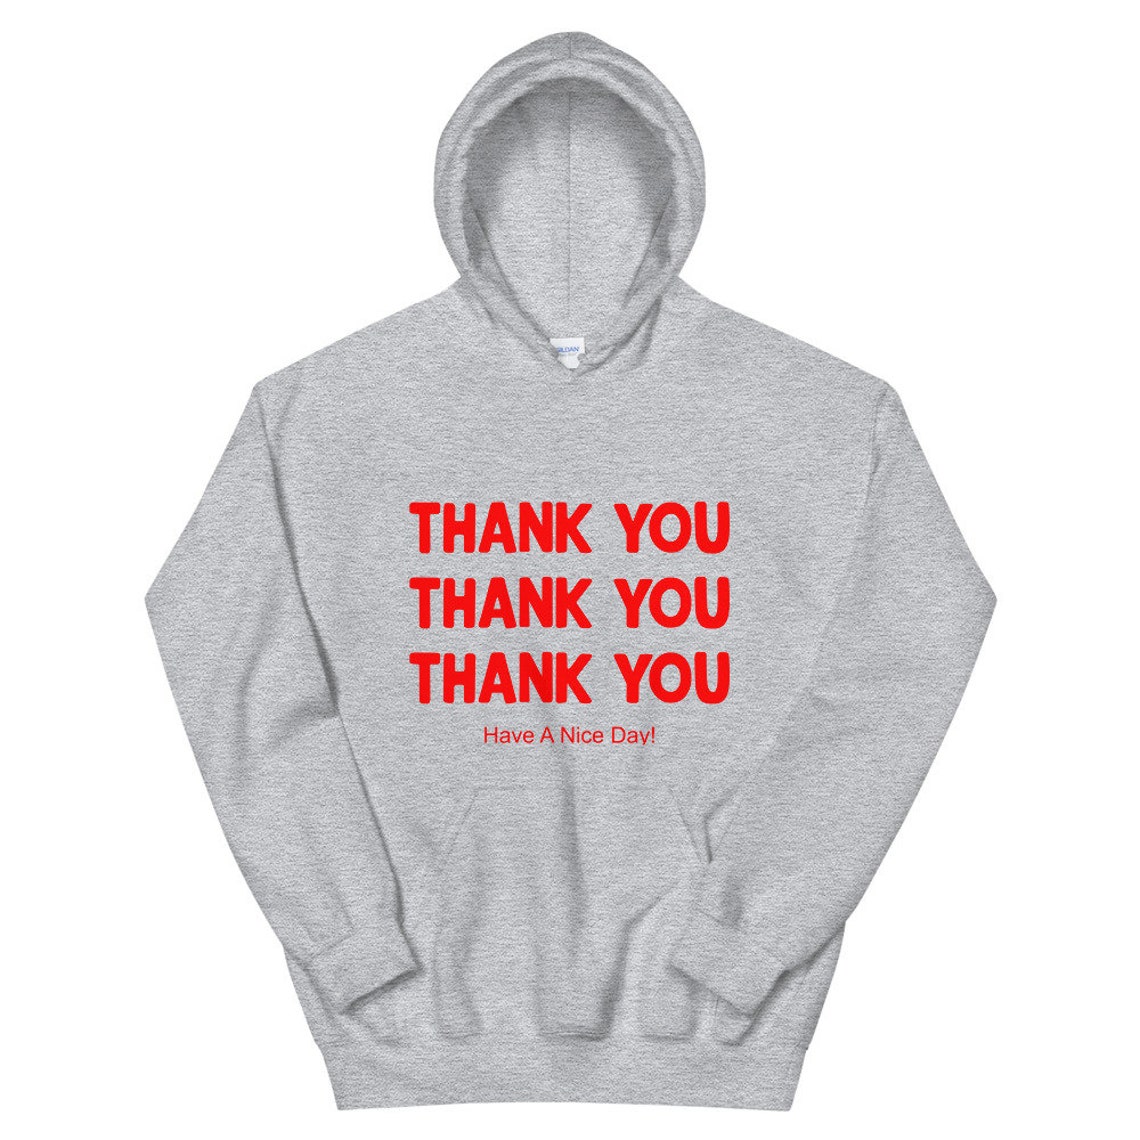 Thank You Unisex Hoodie Oversized Hoodie Tumblr Clothes Off | Etsy